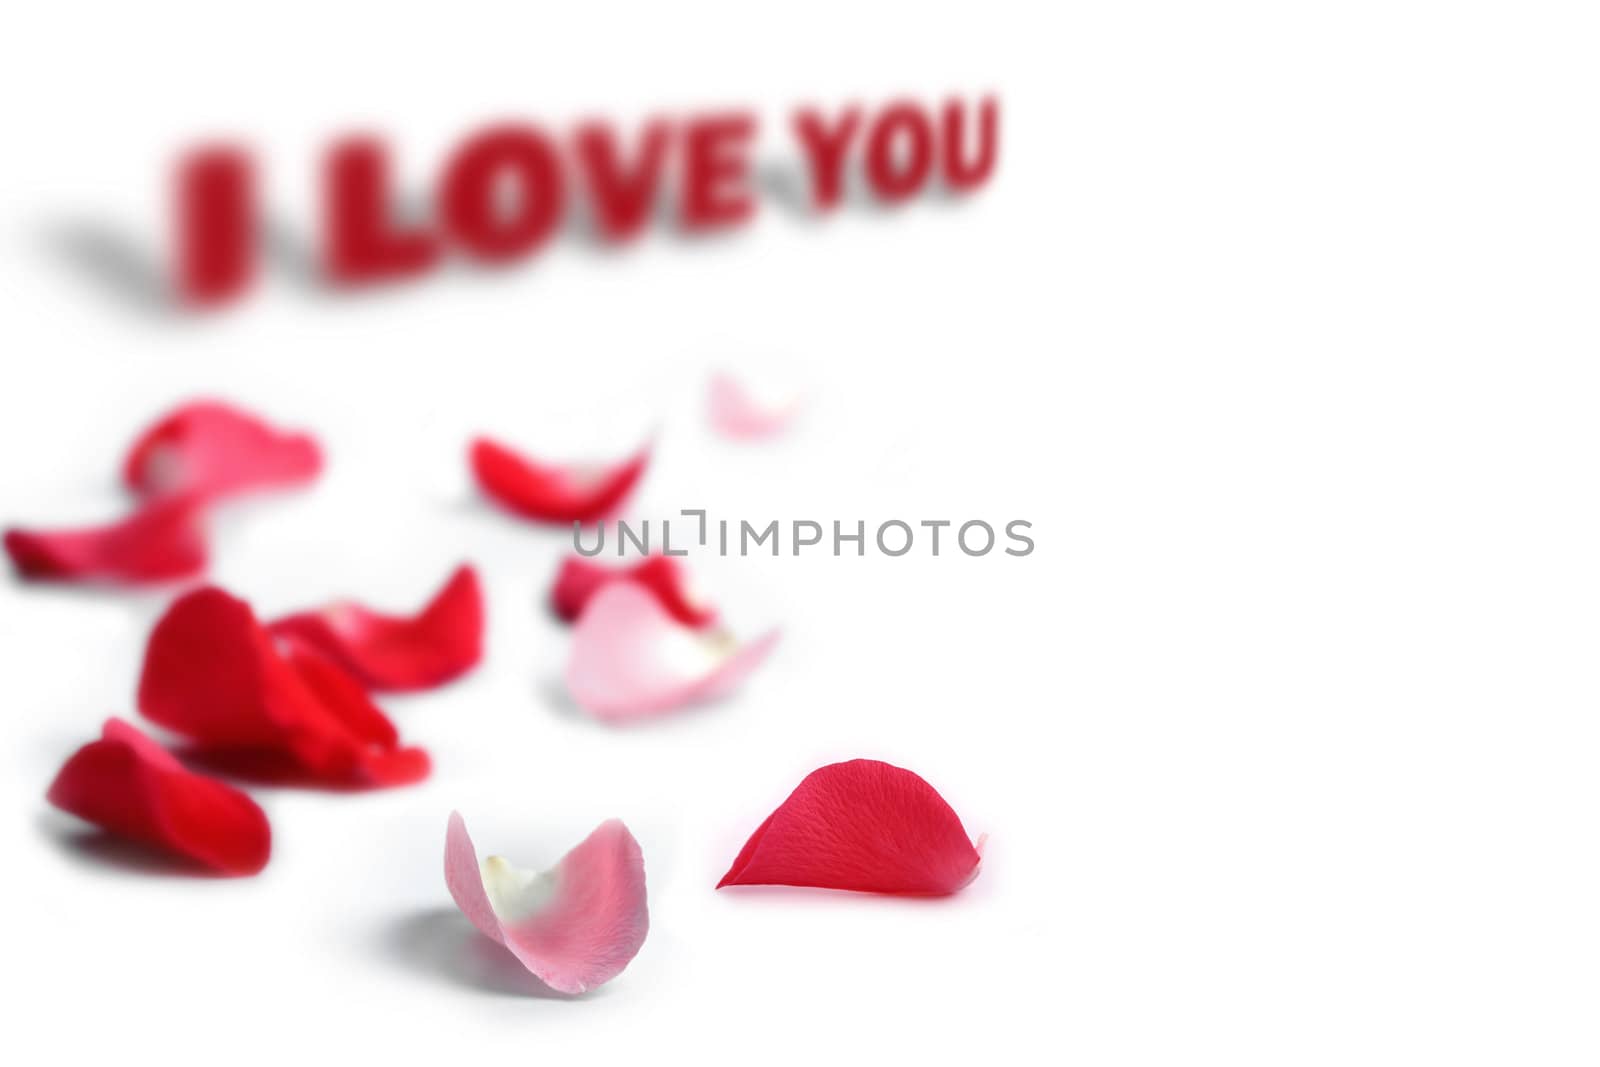 Rose petals with I love you phrase in the background